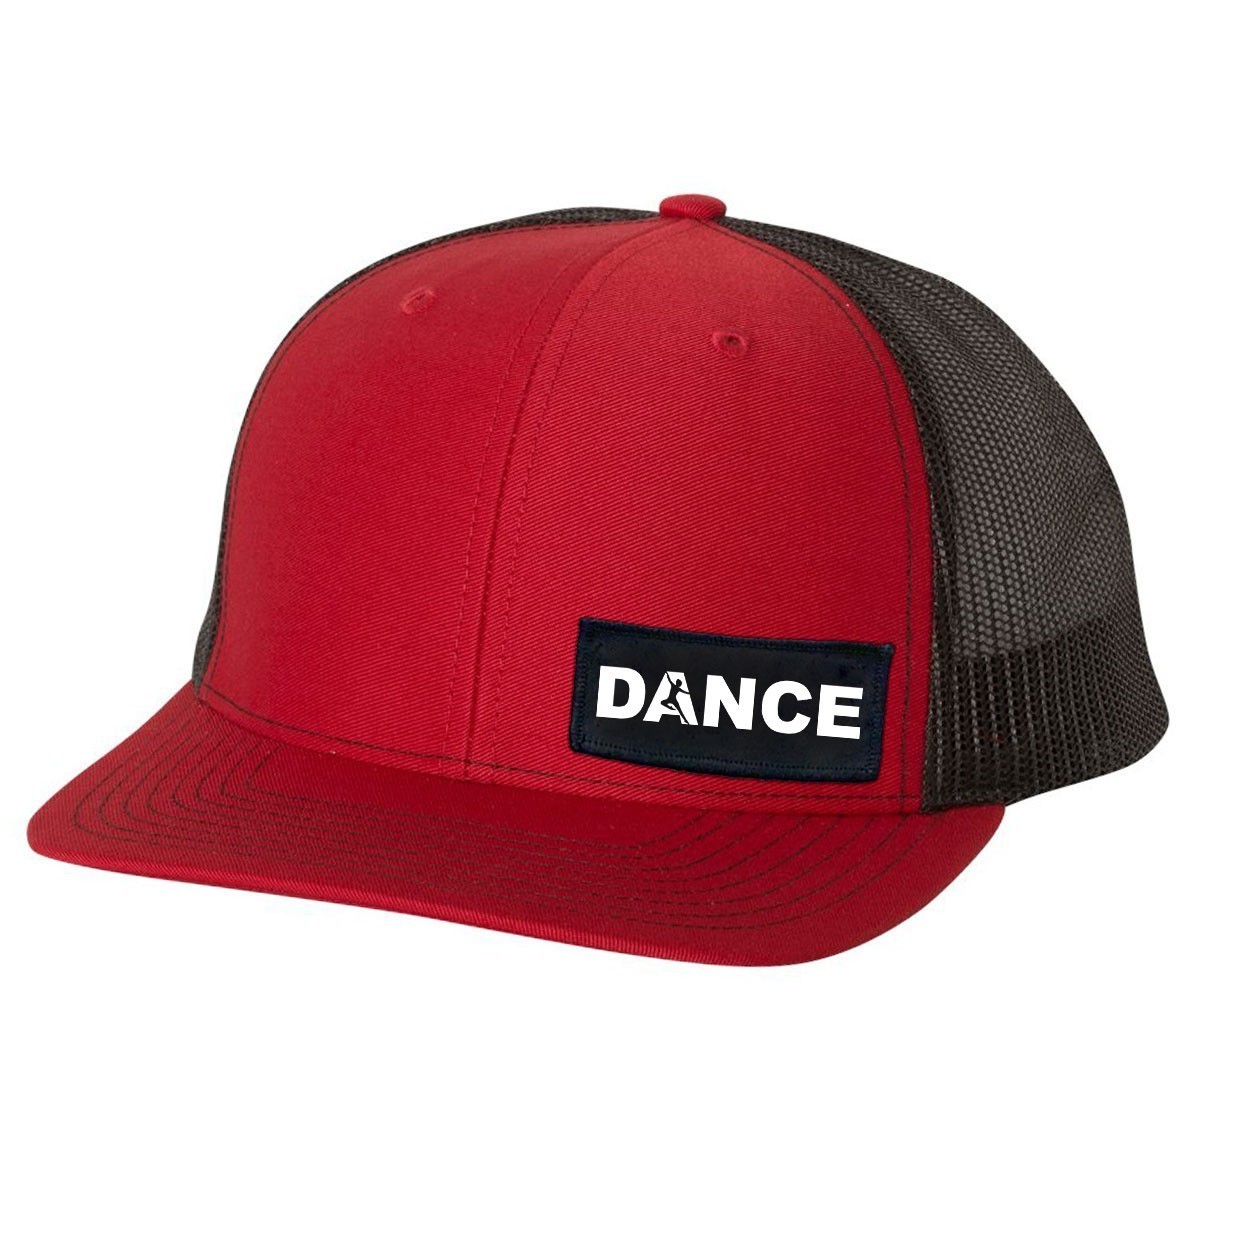 Dance Silhouette Logo Night Out Woven Patch Snapback Trucker Hat Red/Black (White Logo)